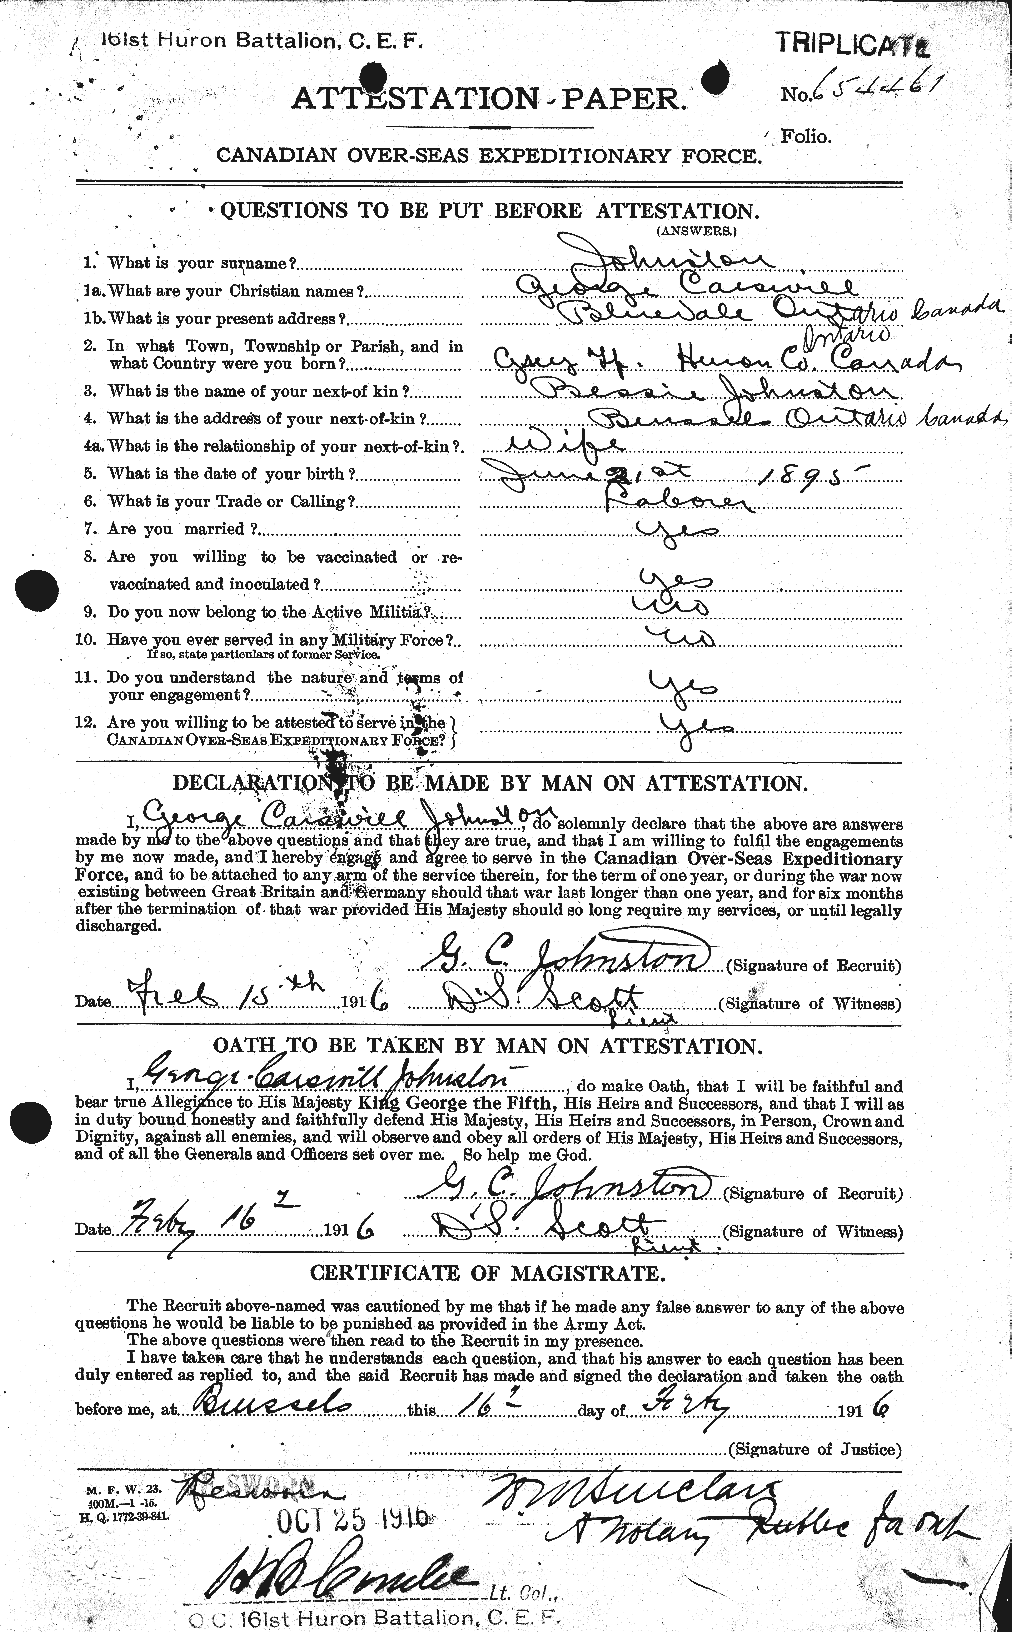 Personnel Records of the First World War - CEF 424125a